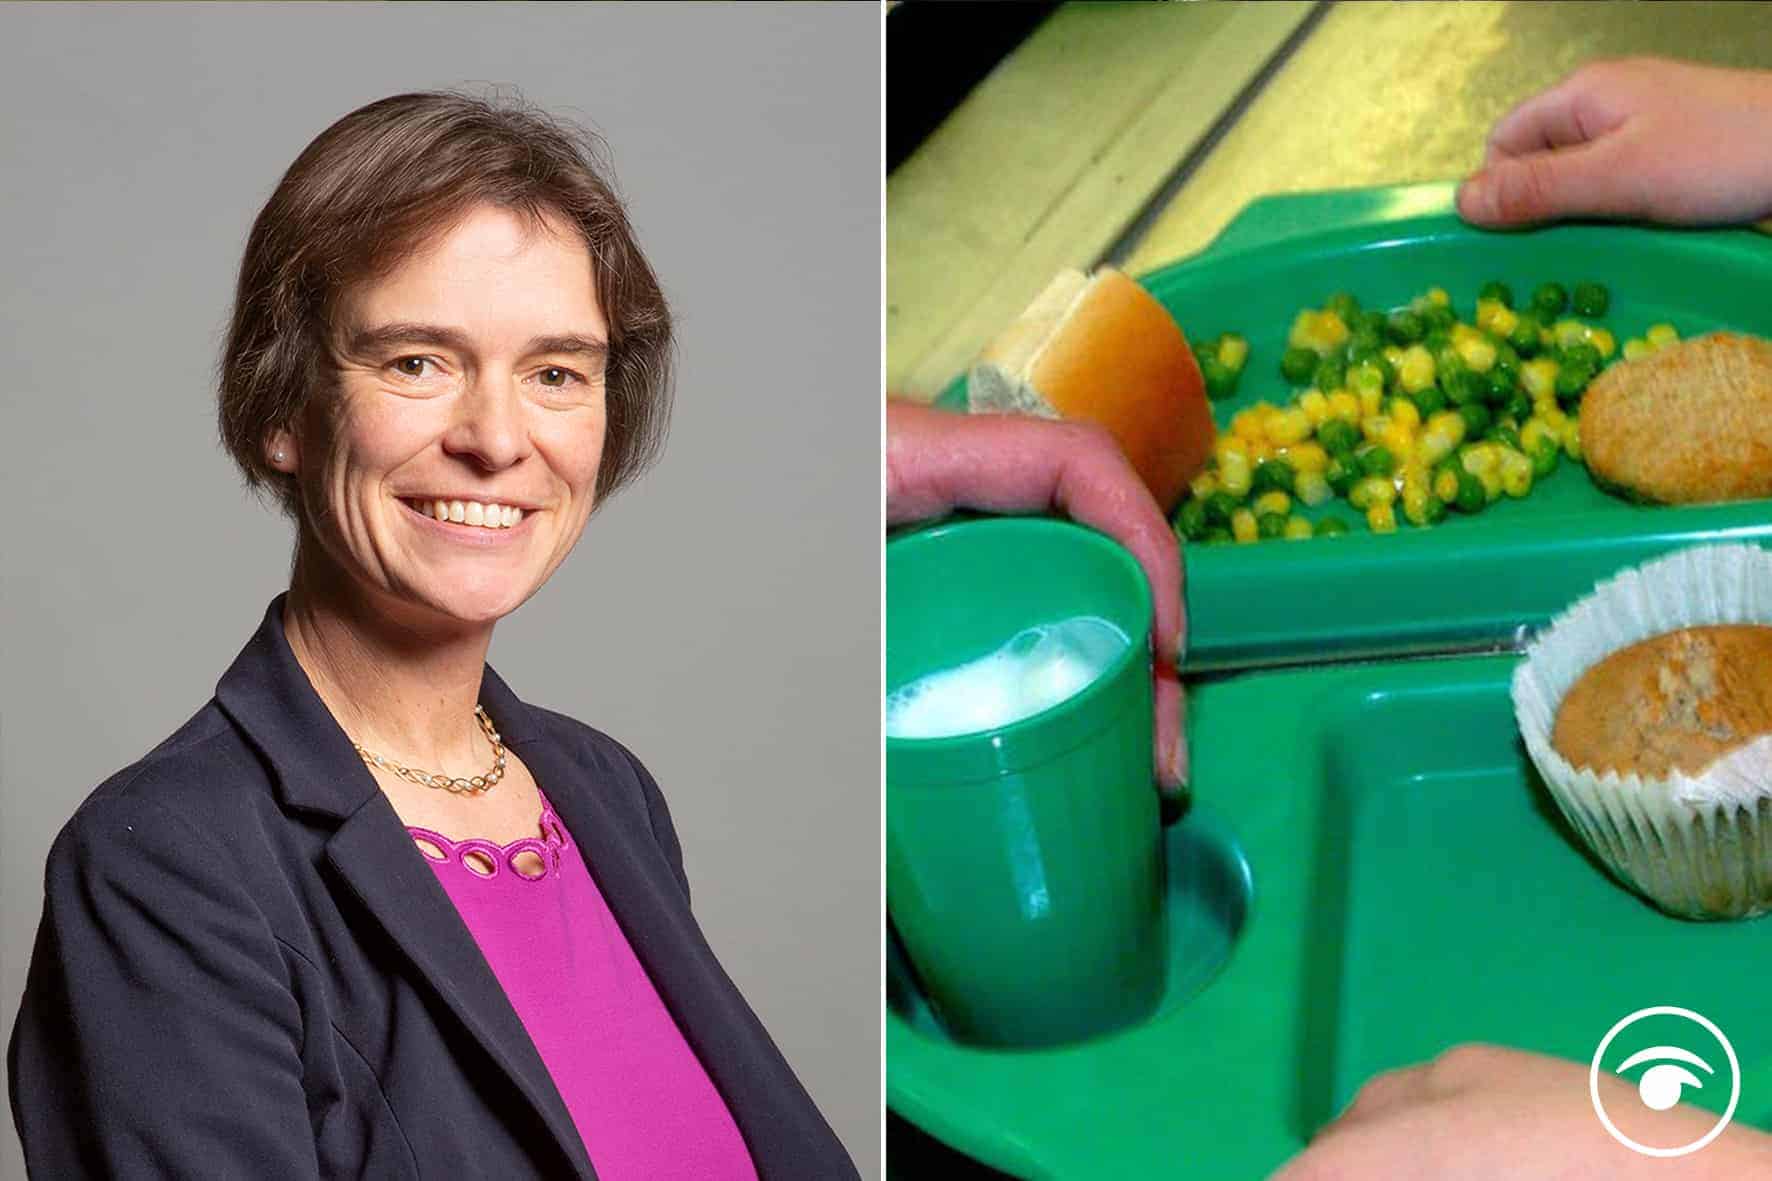 MP Selaine Saxby called out for ‘attacking’ hospitality industry for giving children free food